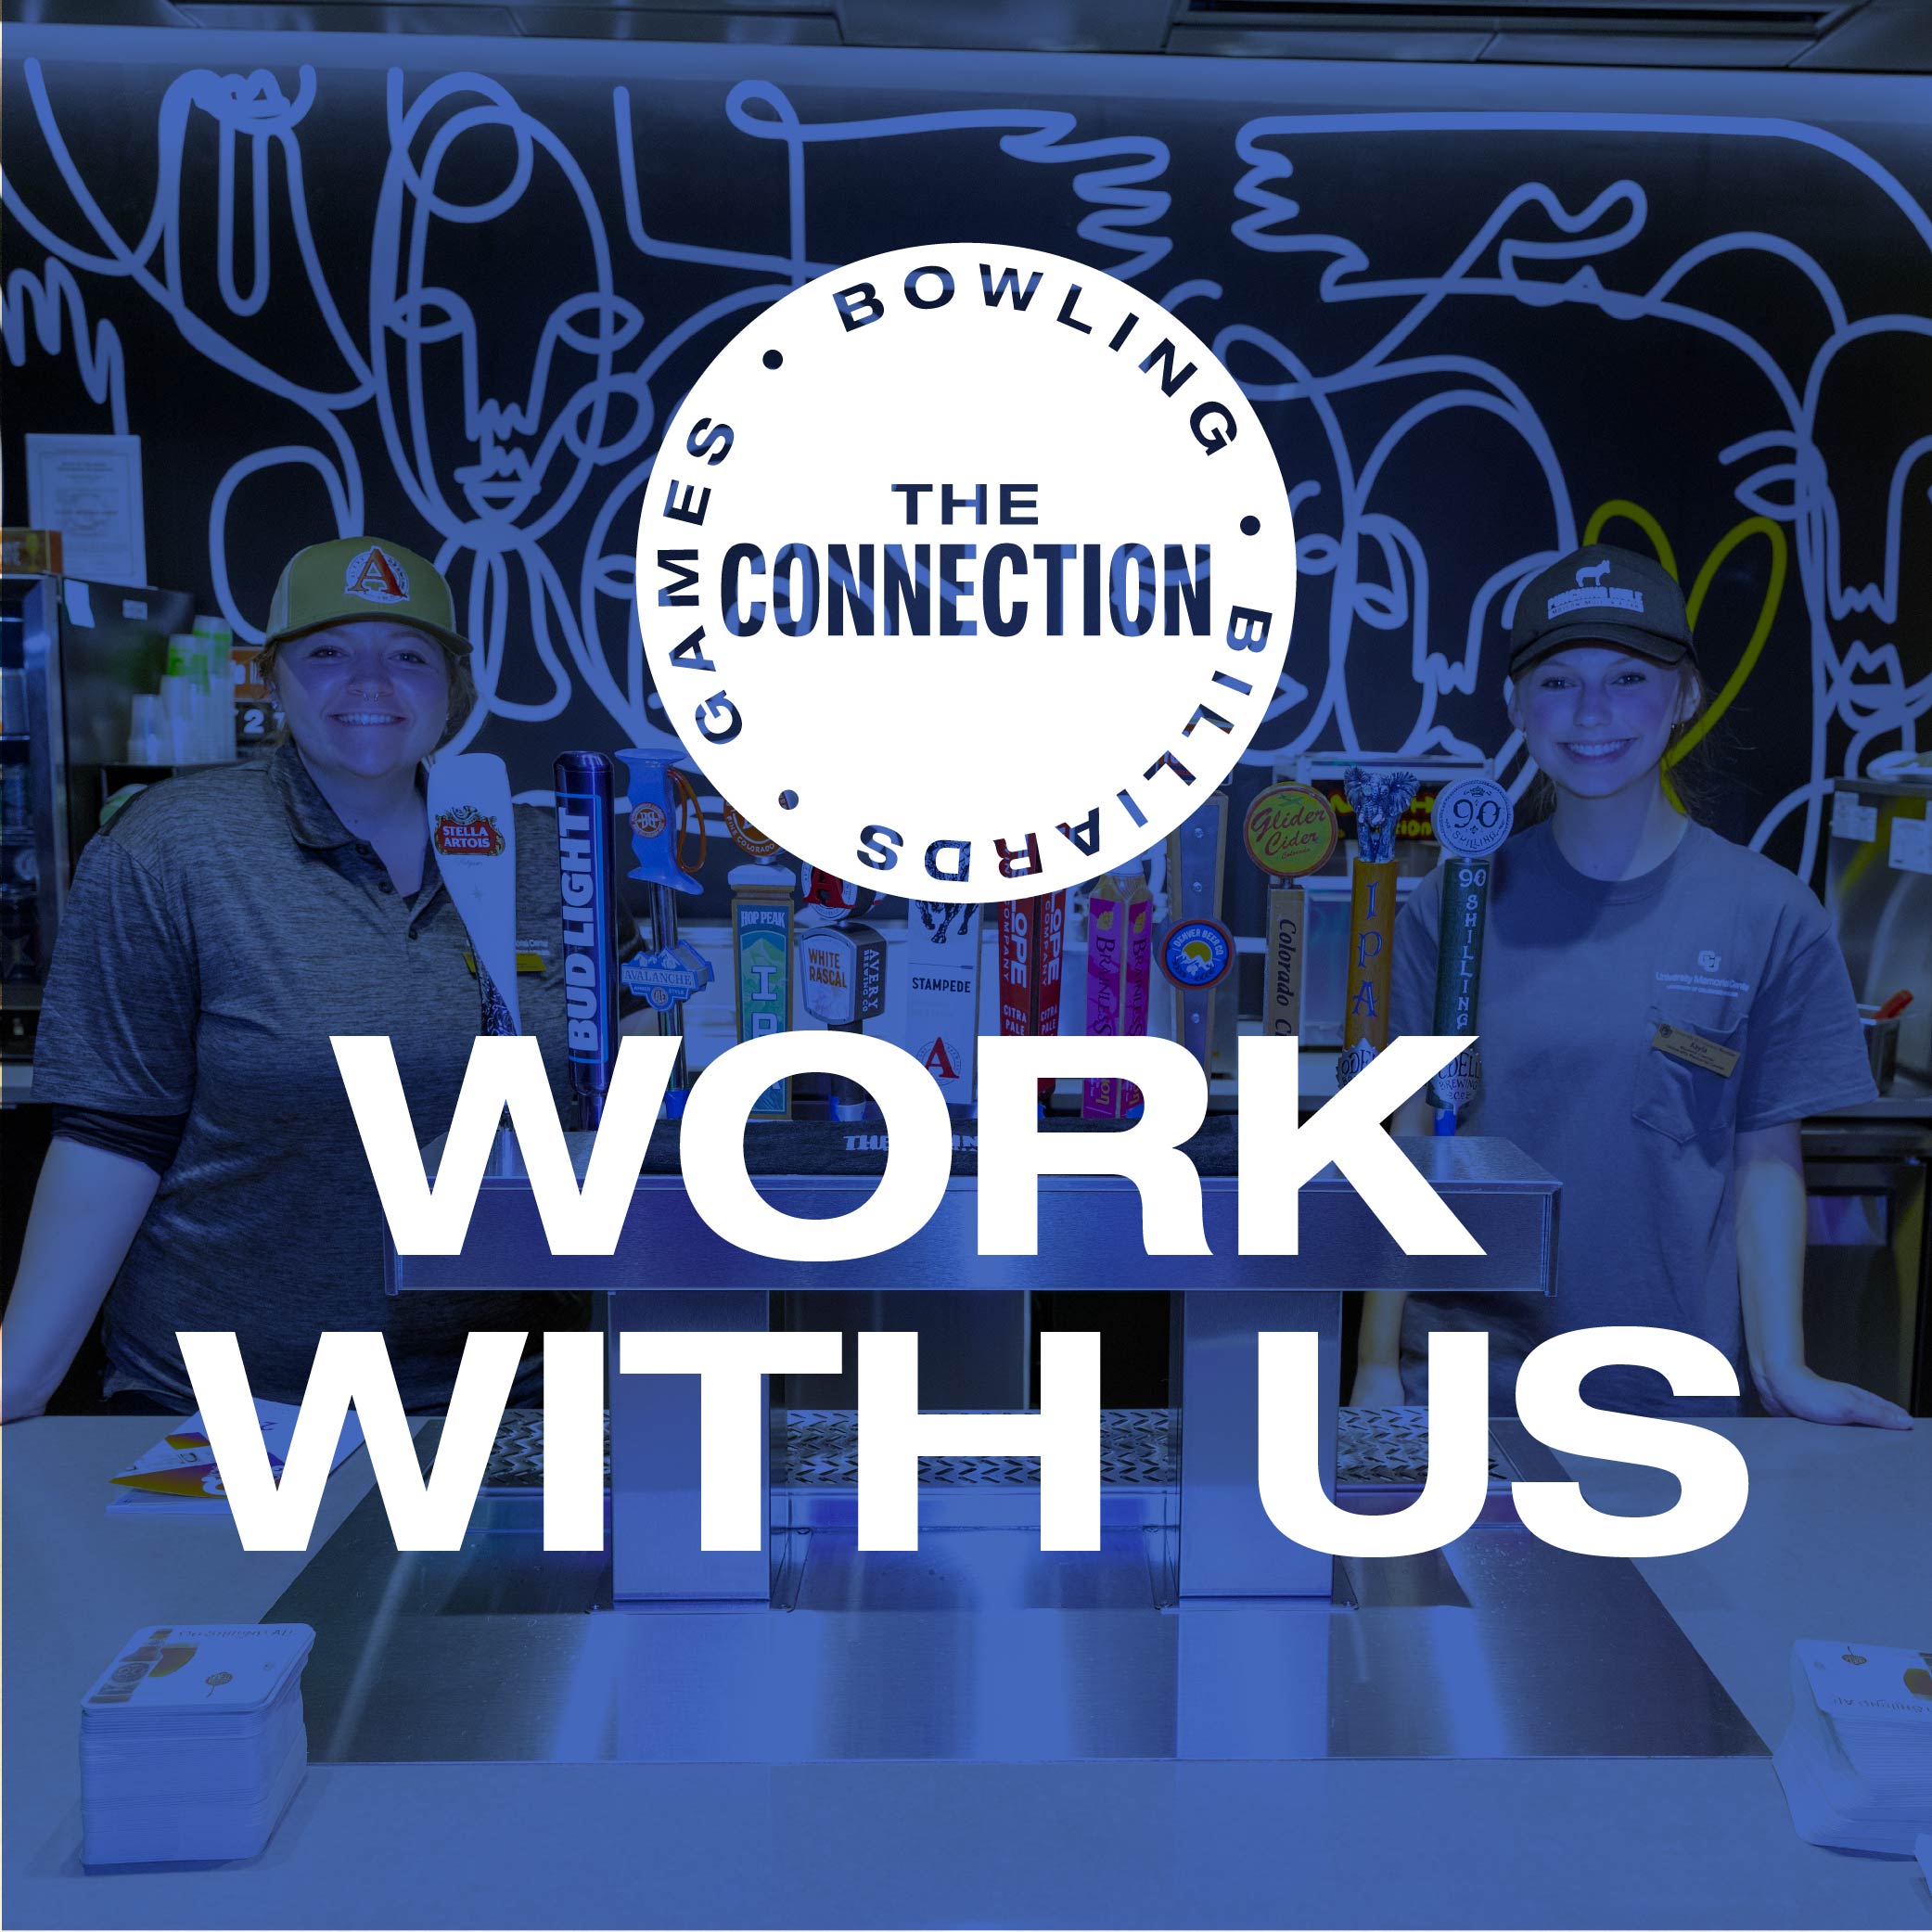 "The Connection: Work with us"